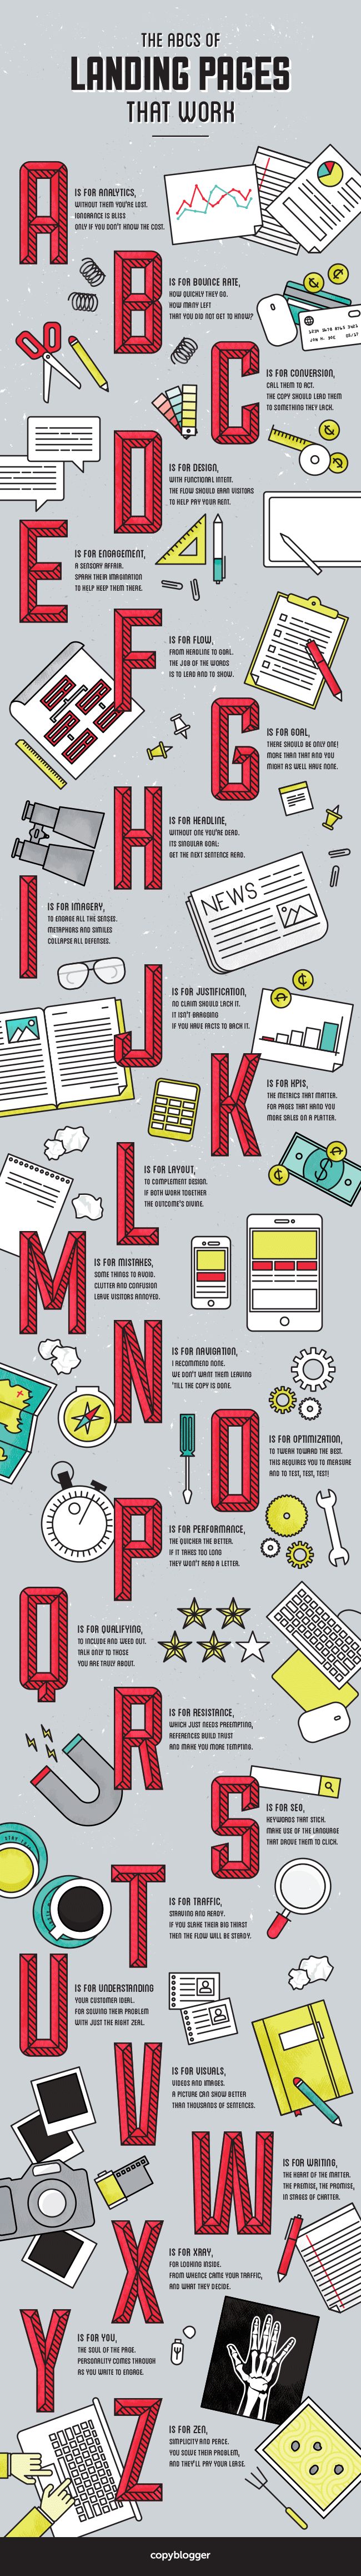 abcs-of-landing-pages-that-work-infographic